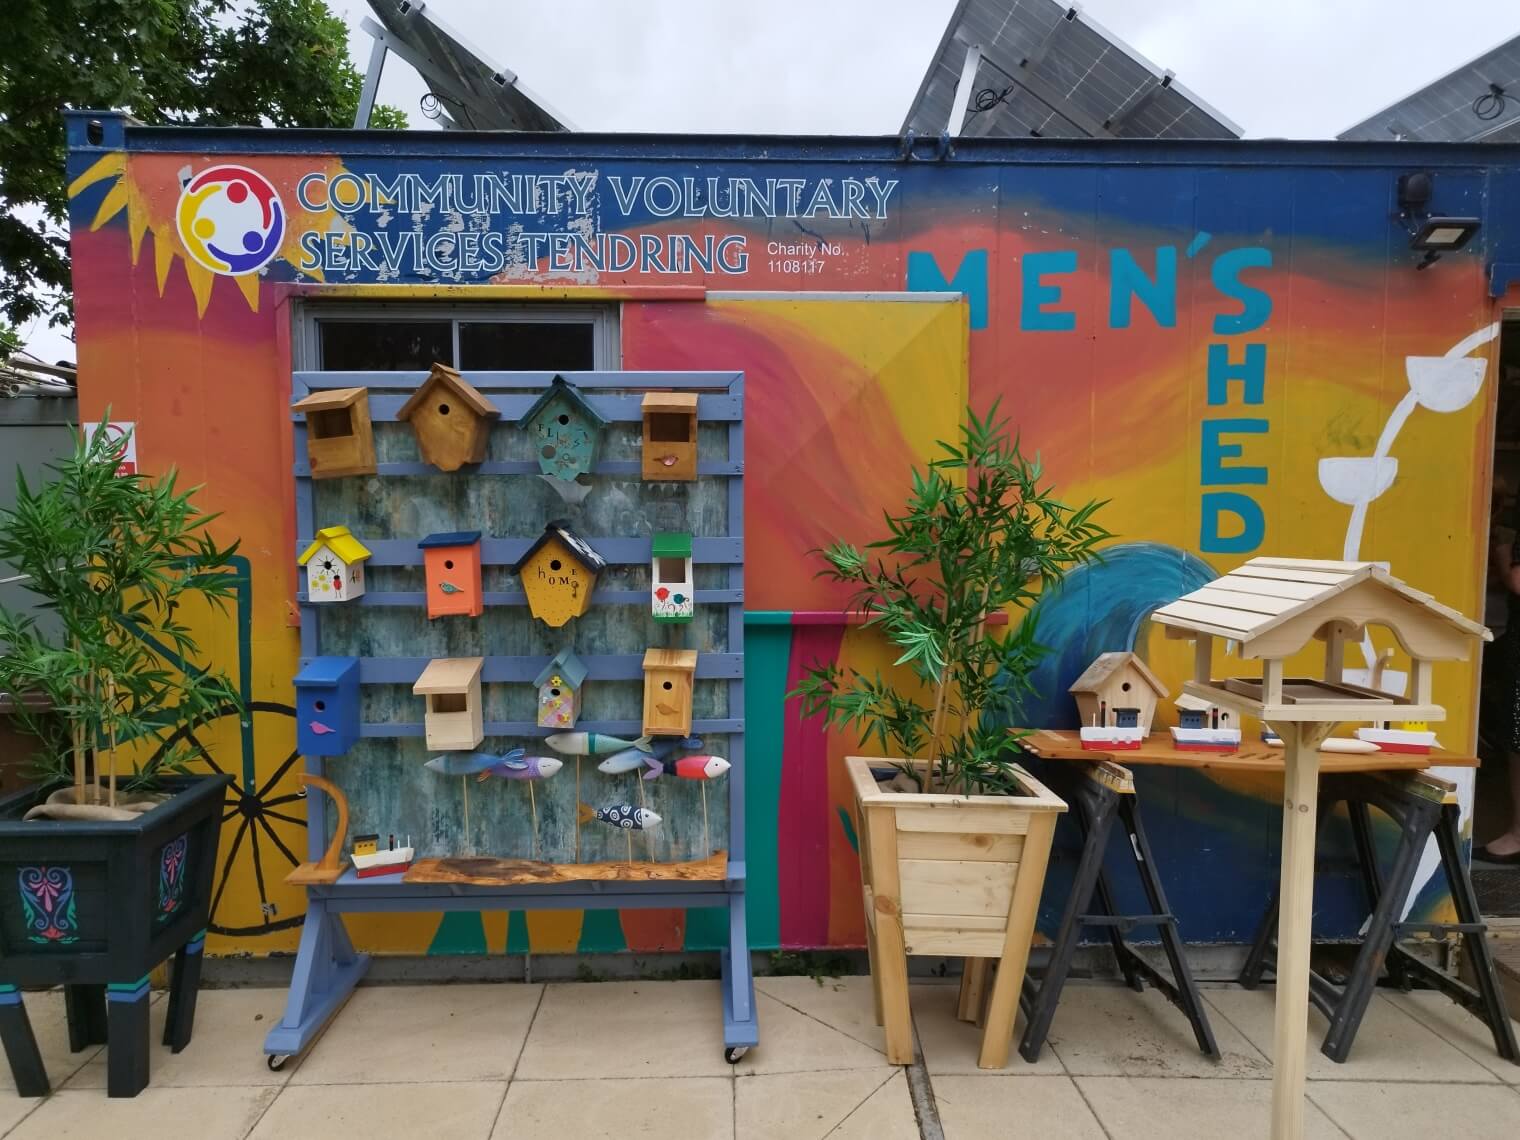 Men’s Shed at Kennedy Way Community Garden in Clacton-on Sea